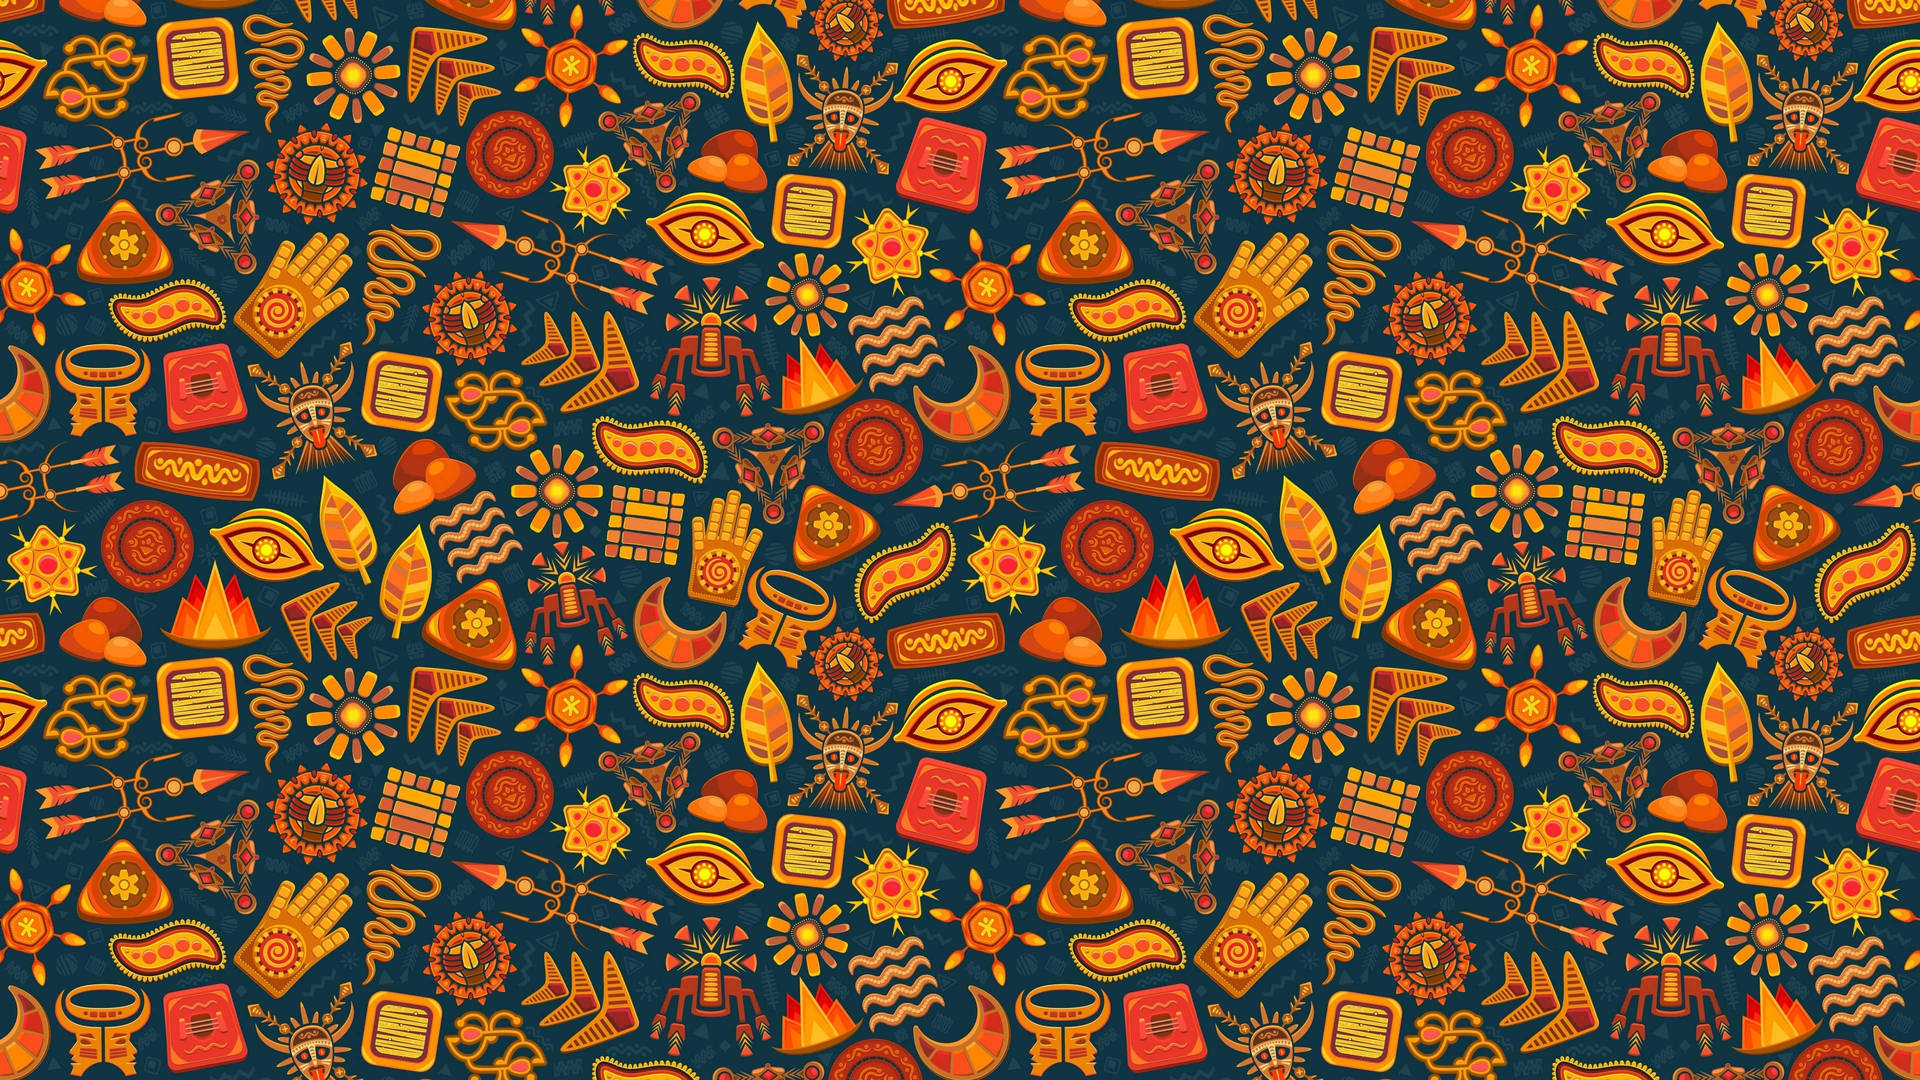 Set Of Vibrantly-colored Aztec-inspired Icons And Patterns For Designs Background